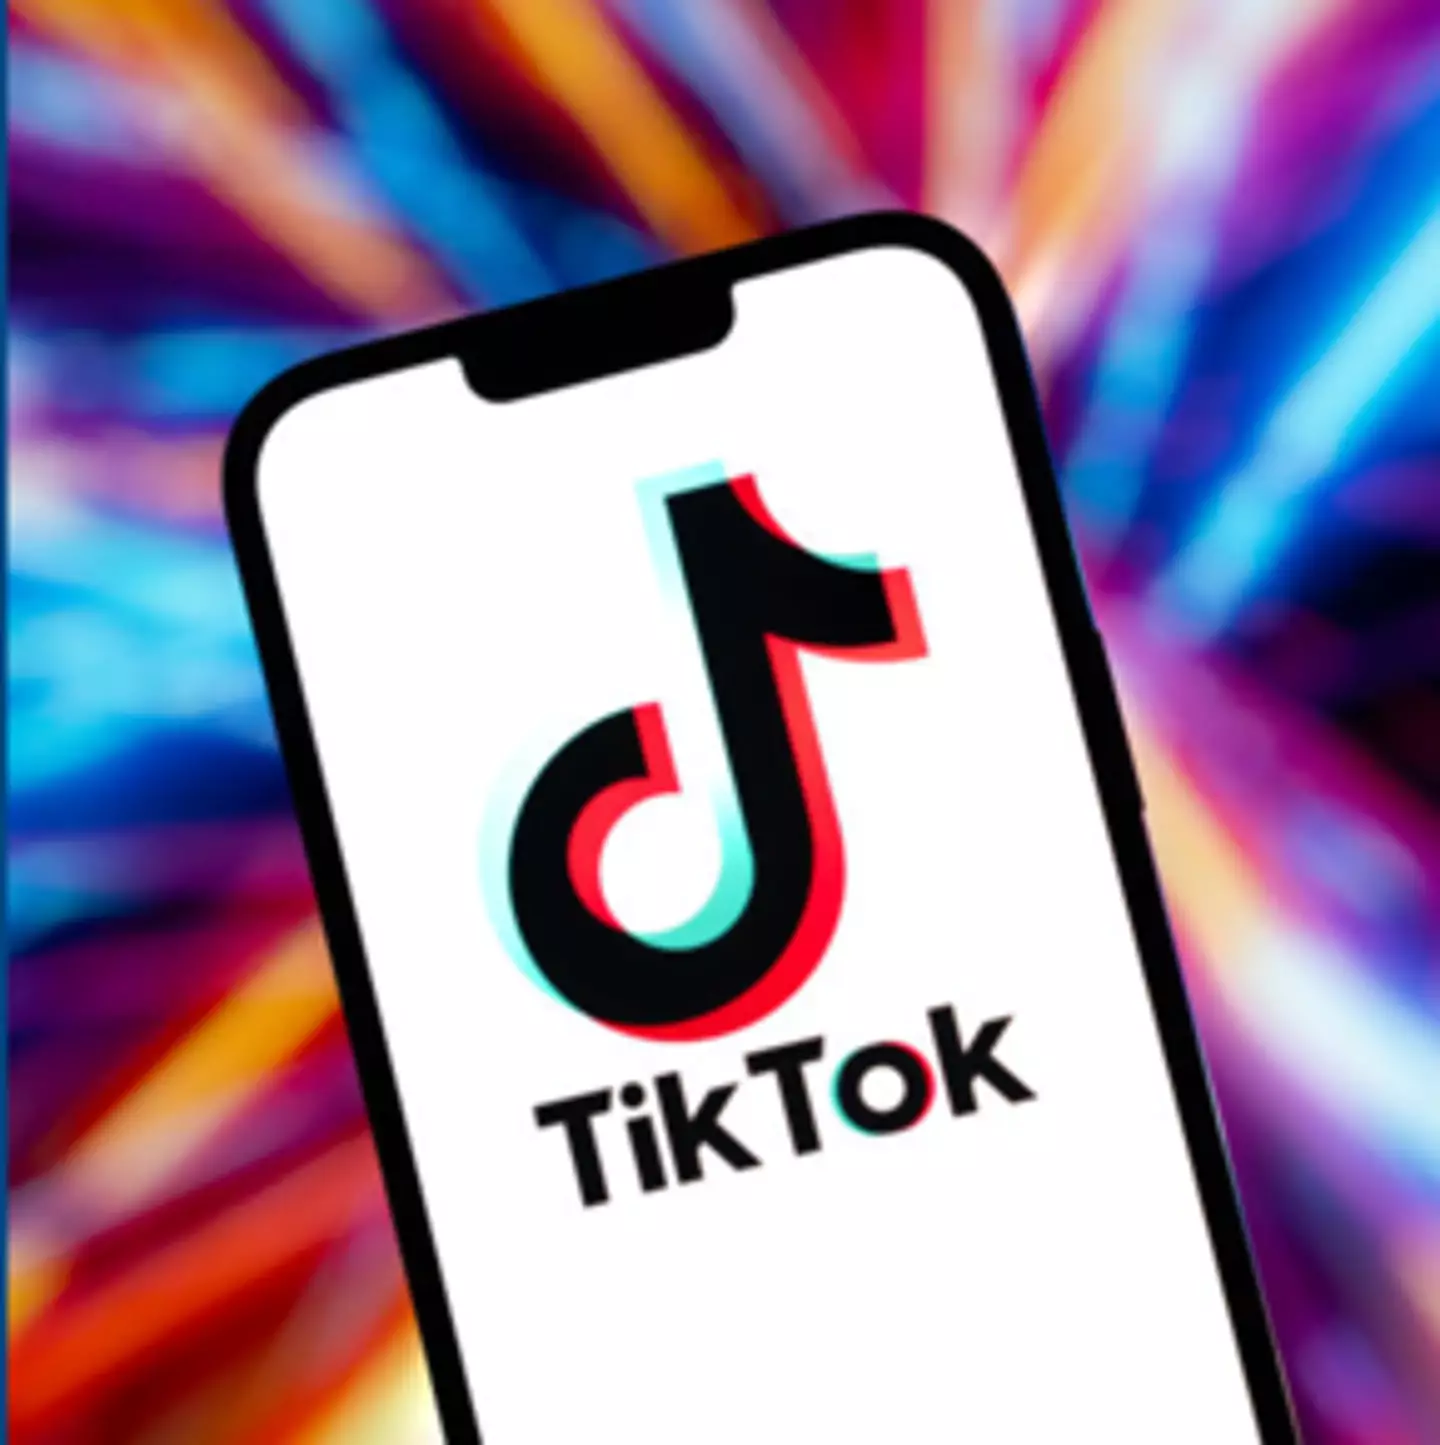 TikTok users left baffled after app requires their iPhone password to open it